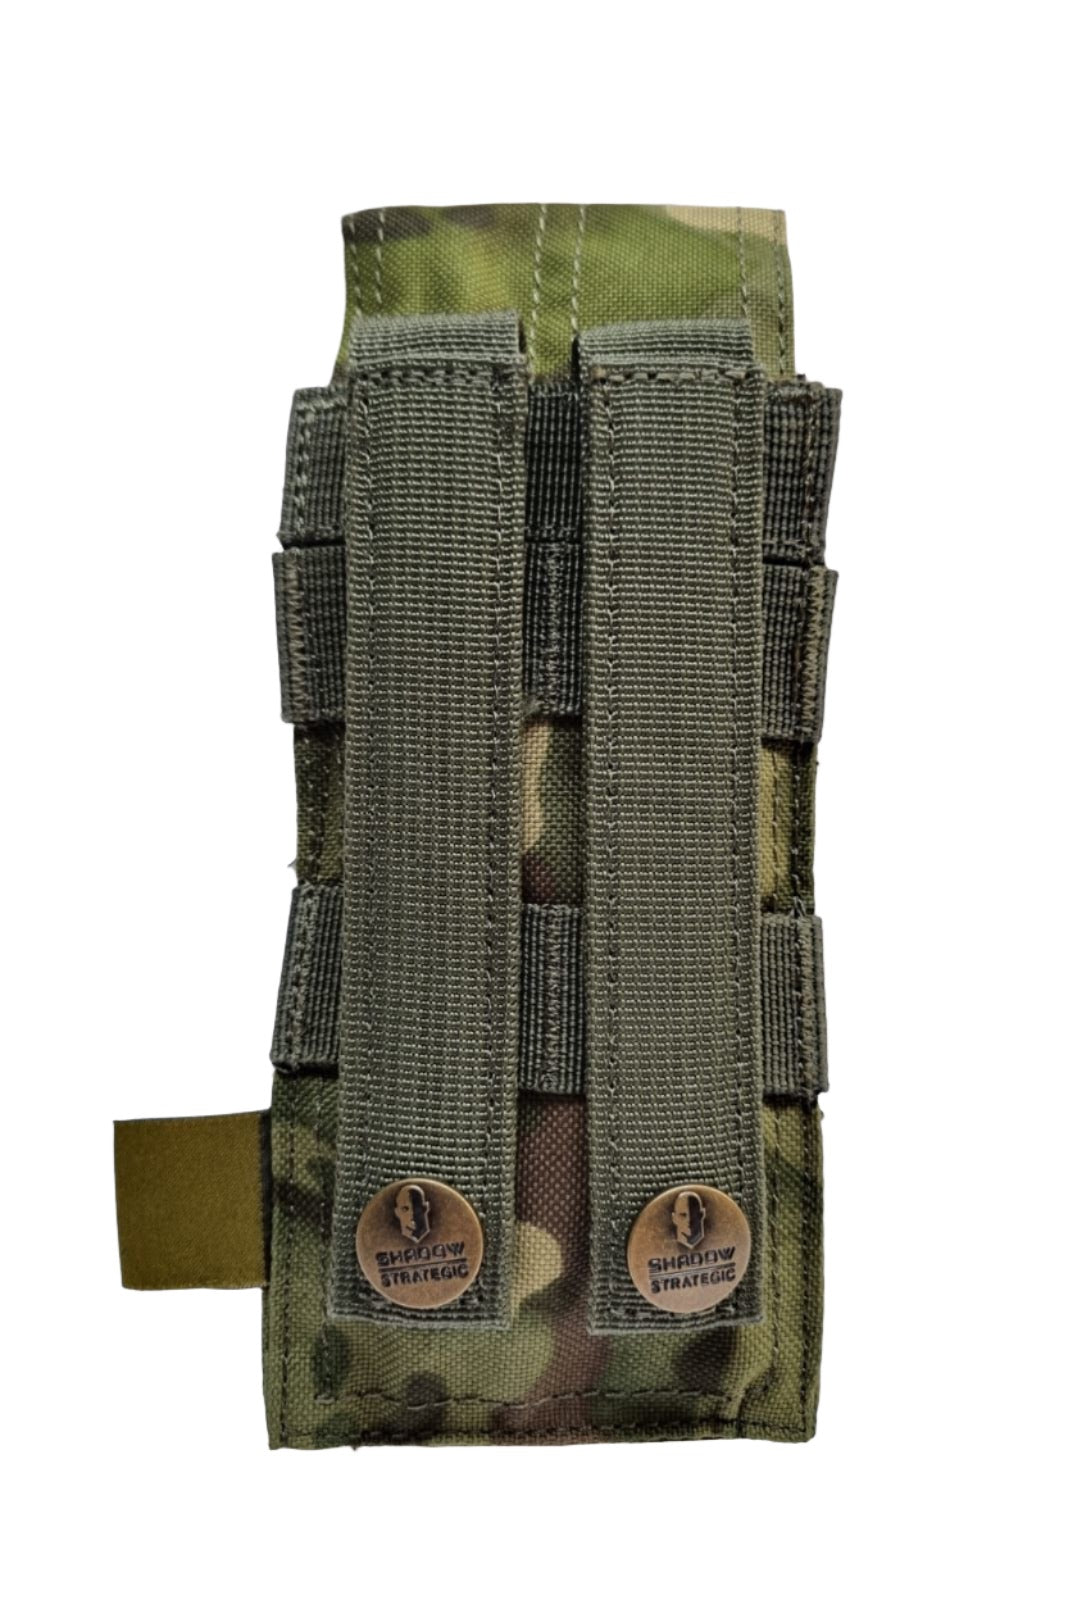 SHE-920 SINGLE M4 5.56MM MAG POUCH COLOR MULTICAM GREEN